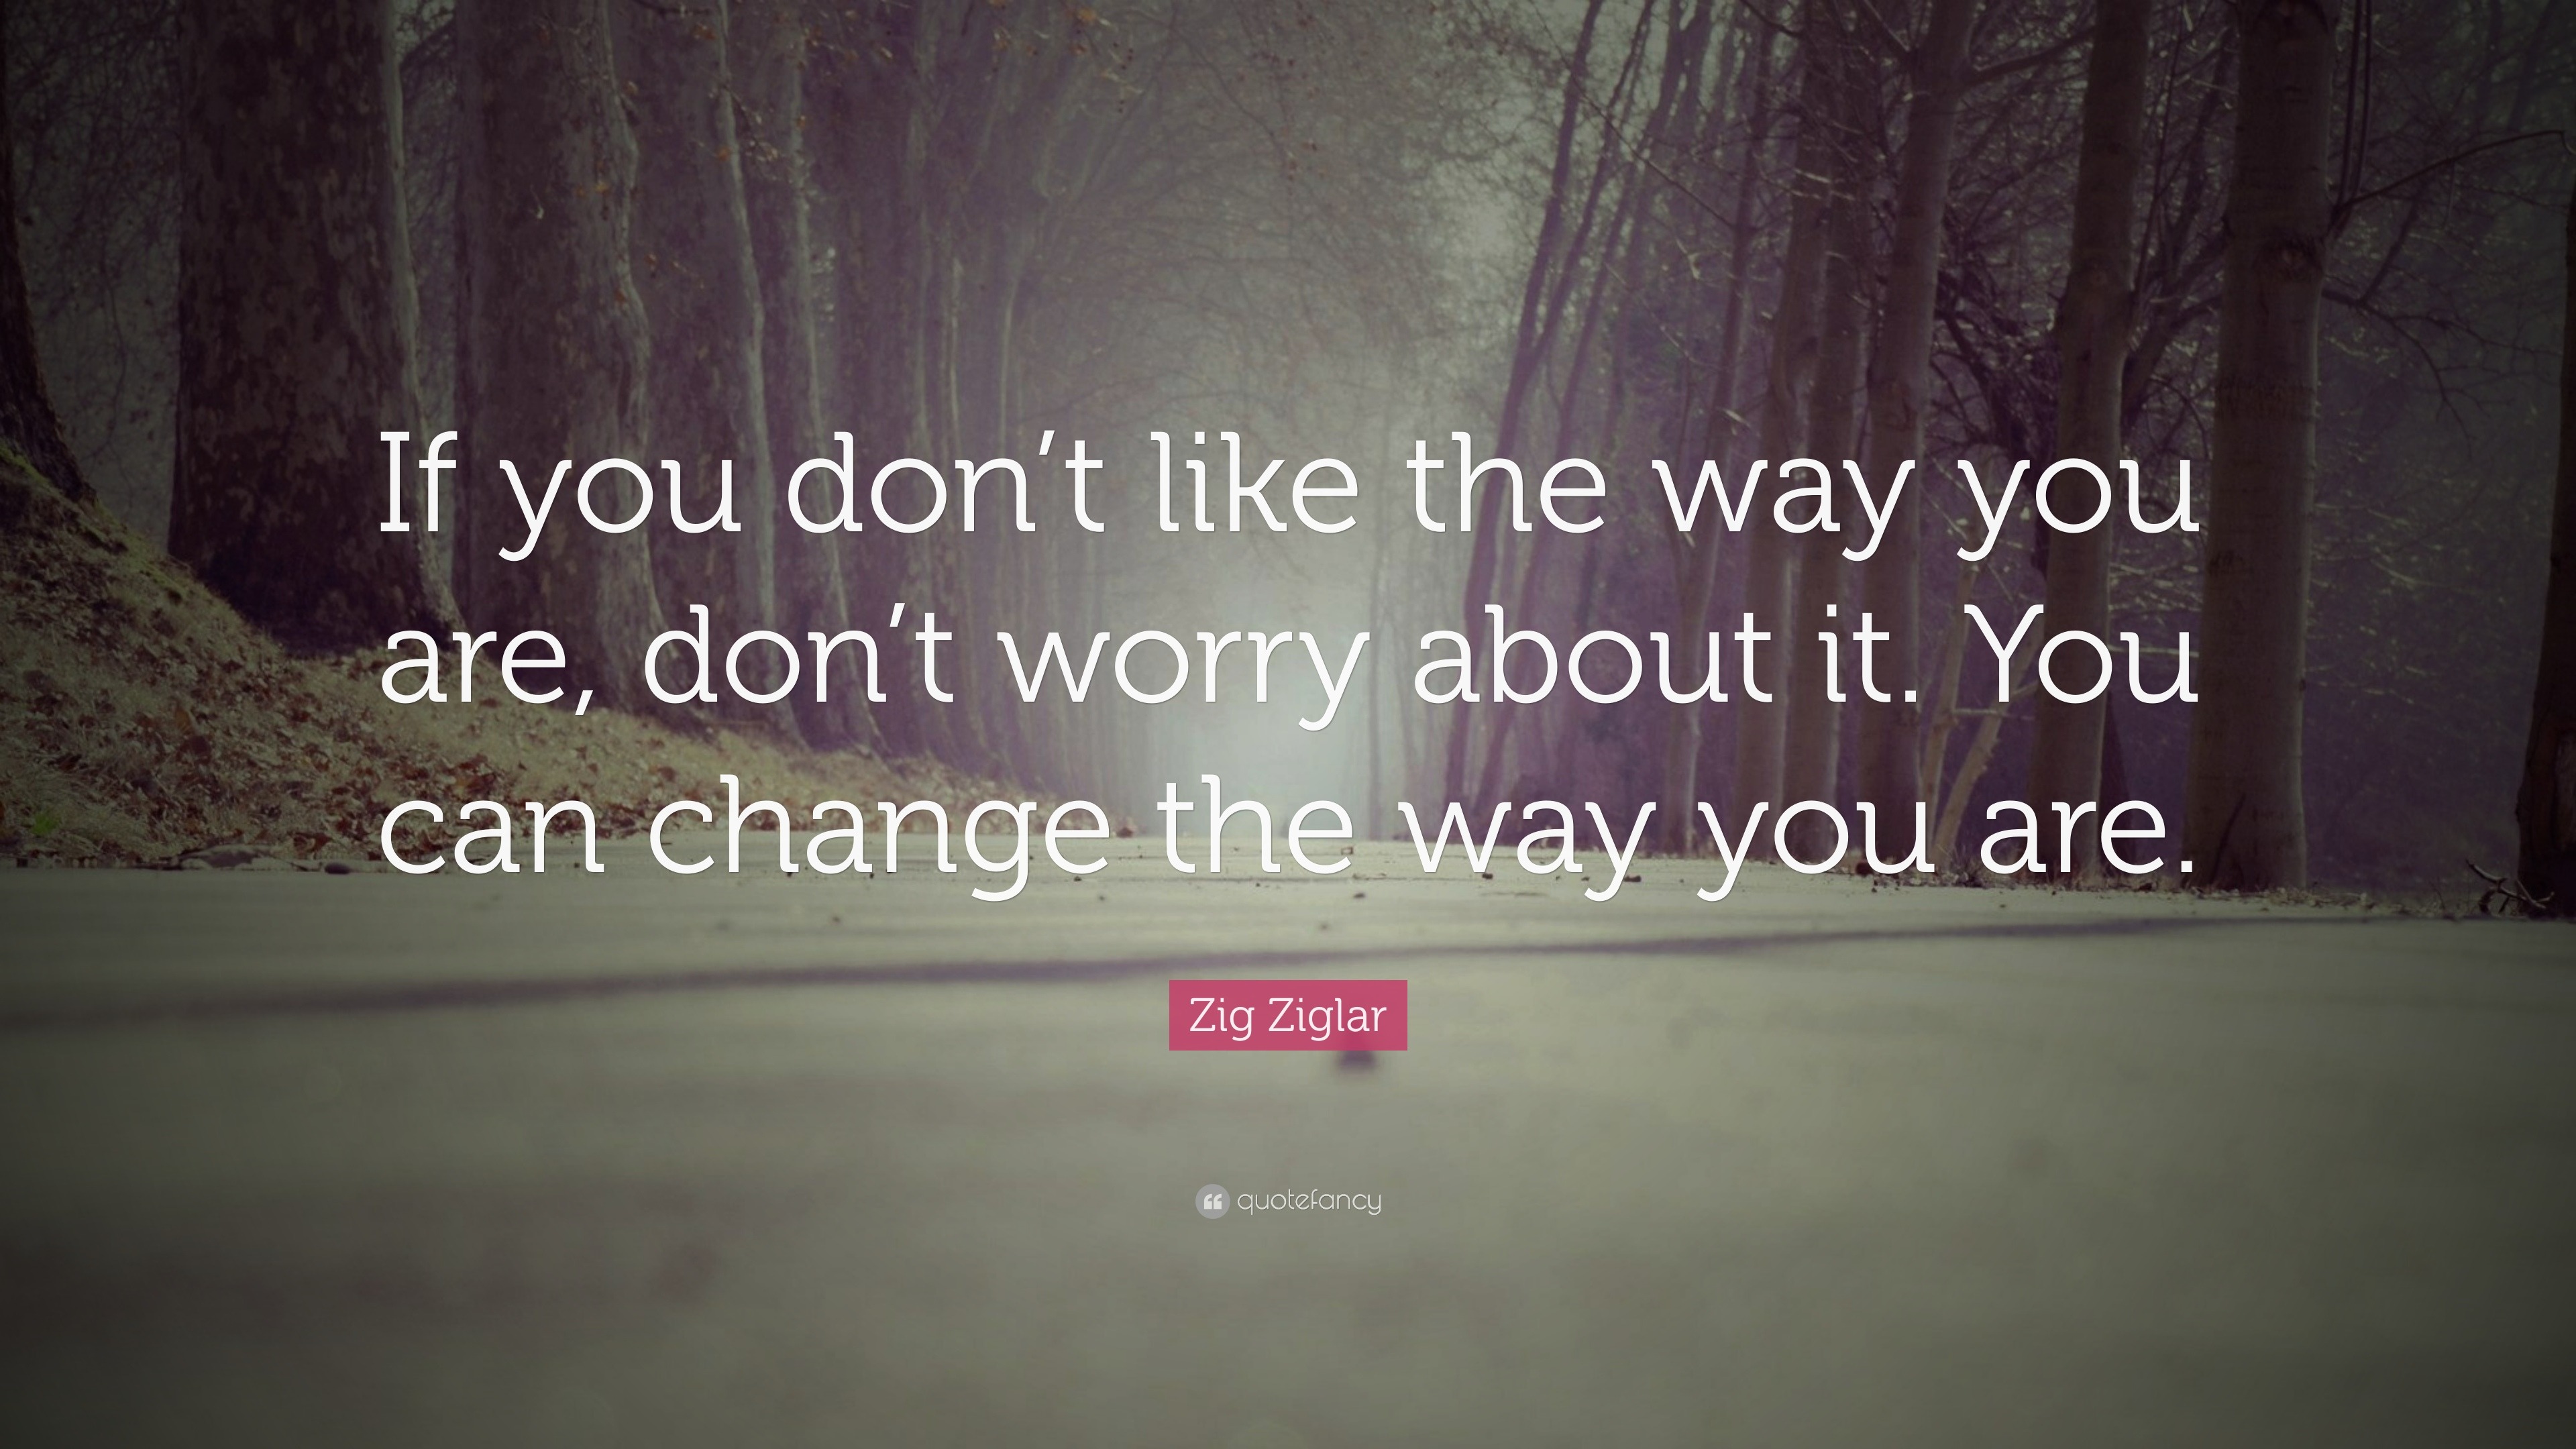 If you don’t like the way you are, don’t worry about it. 